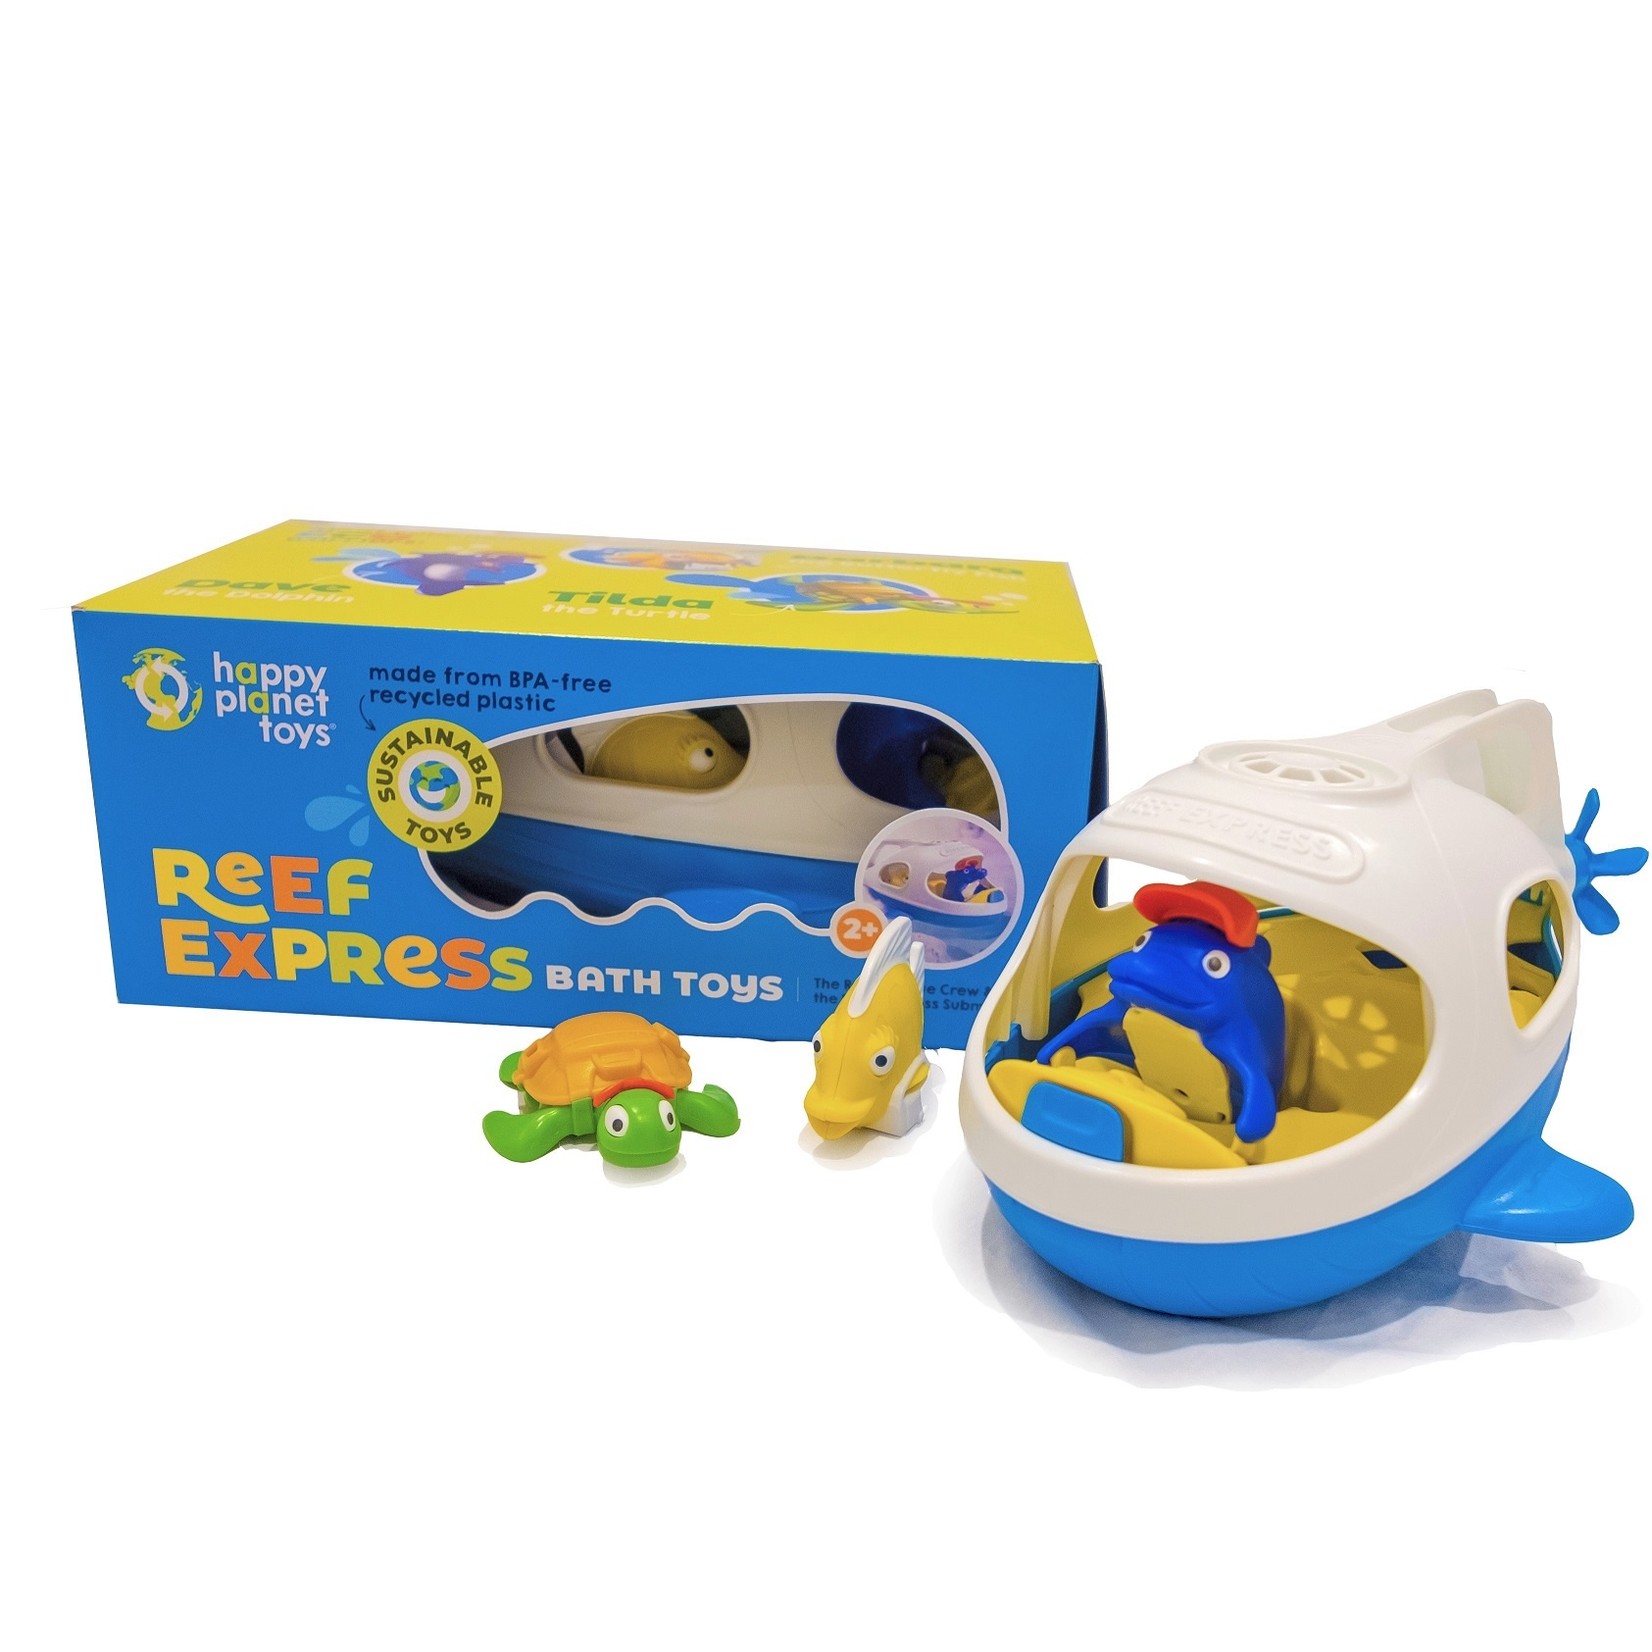 Happy Planet Toys Happy Planet Toys - Reed Express Bath Toy Set